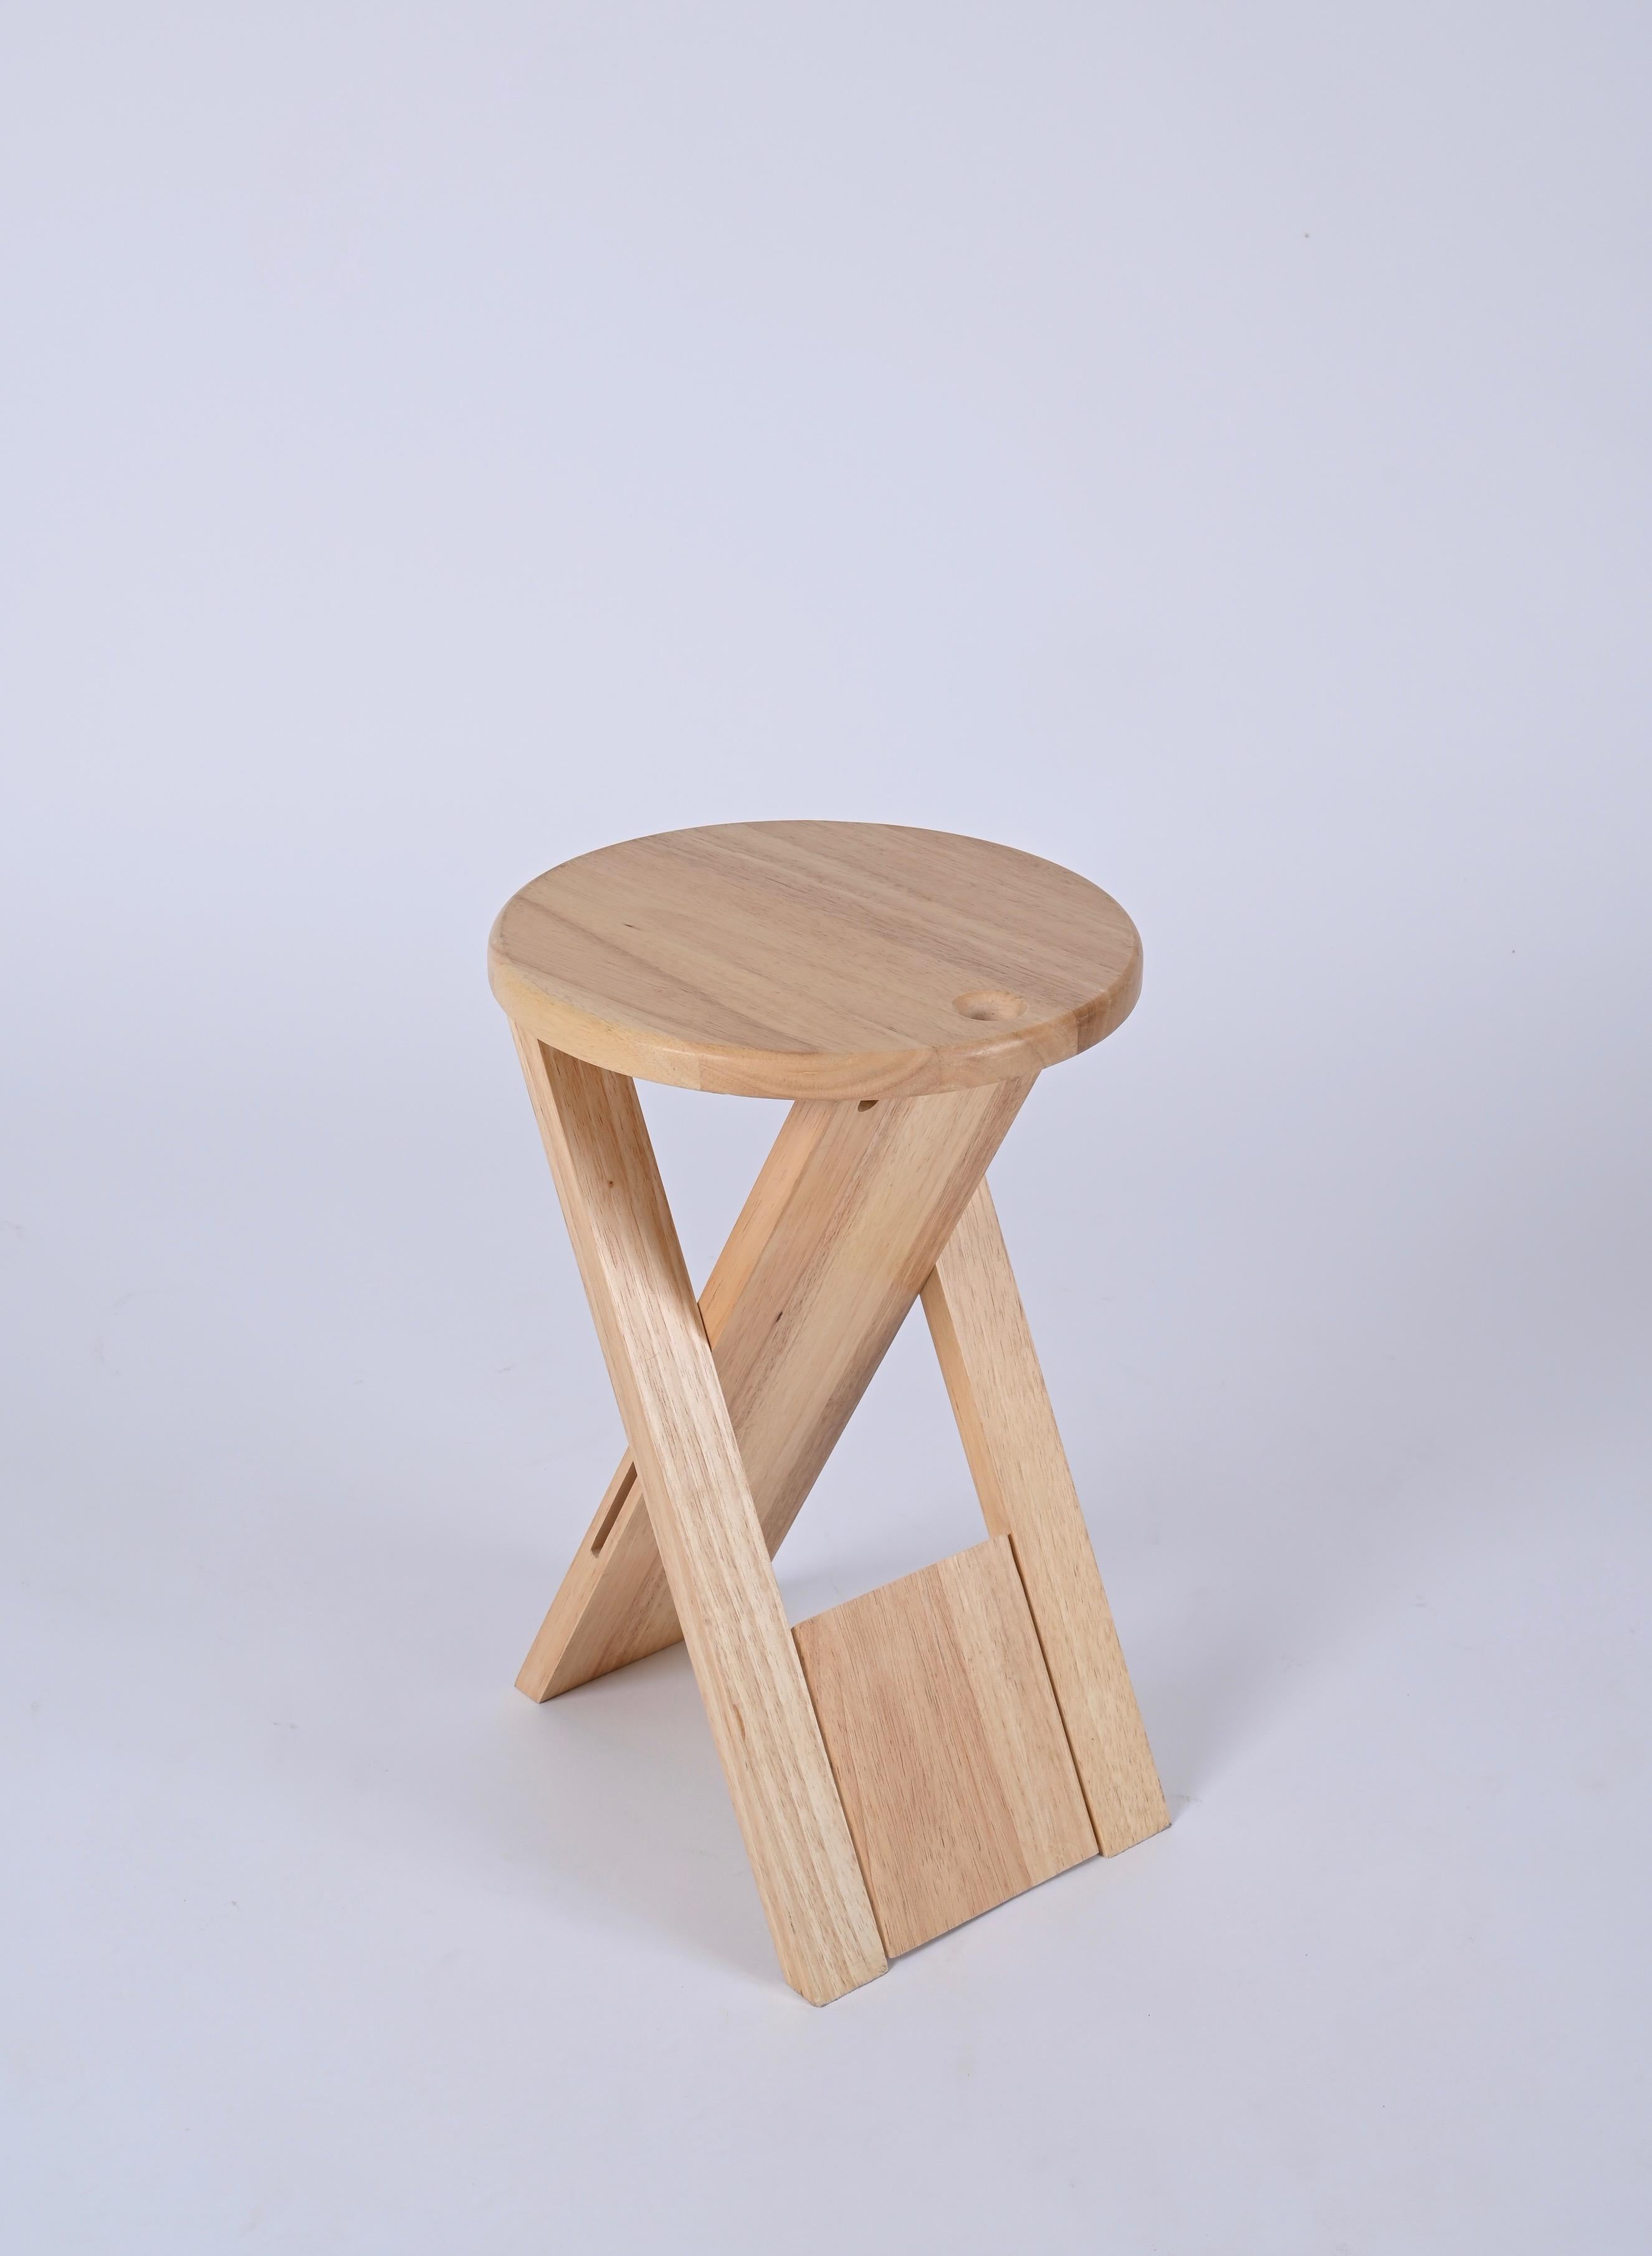 Wood Mid-Century Pair of Roger Tallon Ts Folding Stools for Sentou, France 1970s For Sale